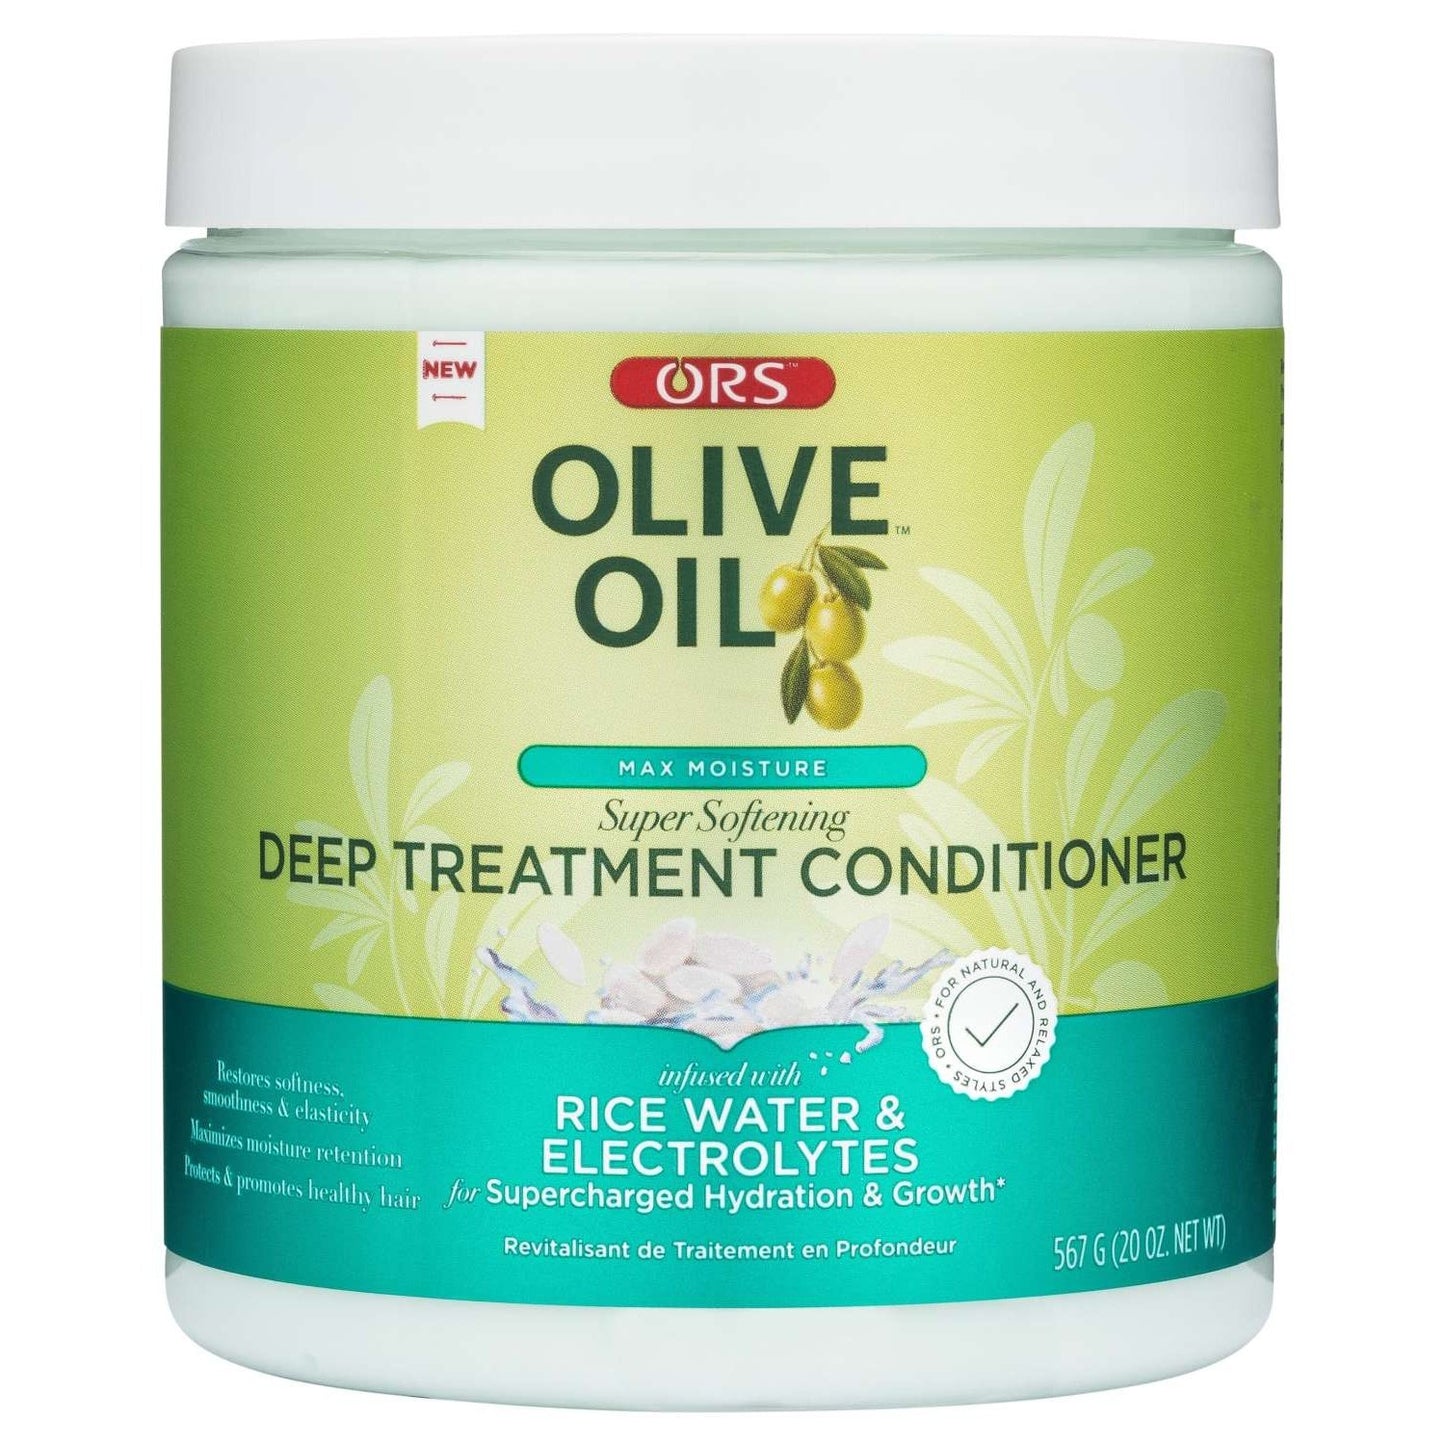 Ors Olive Oil Max Moisture Deep Treatment Conditioner